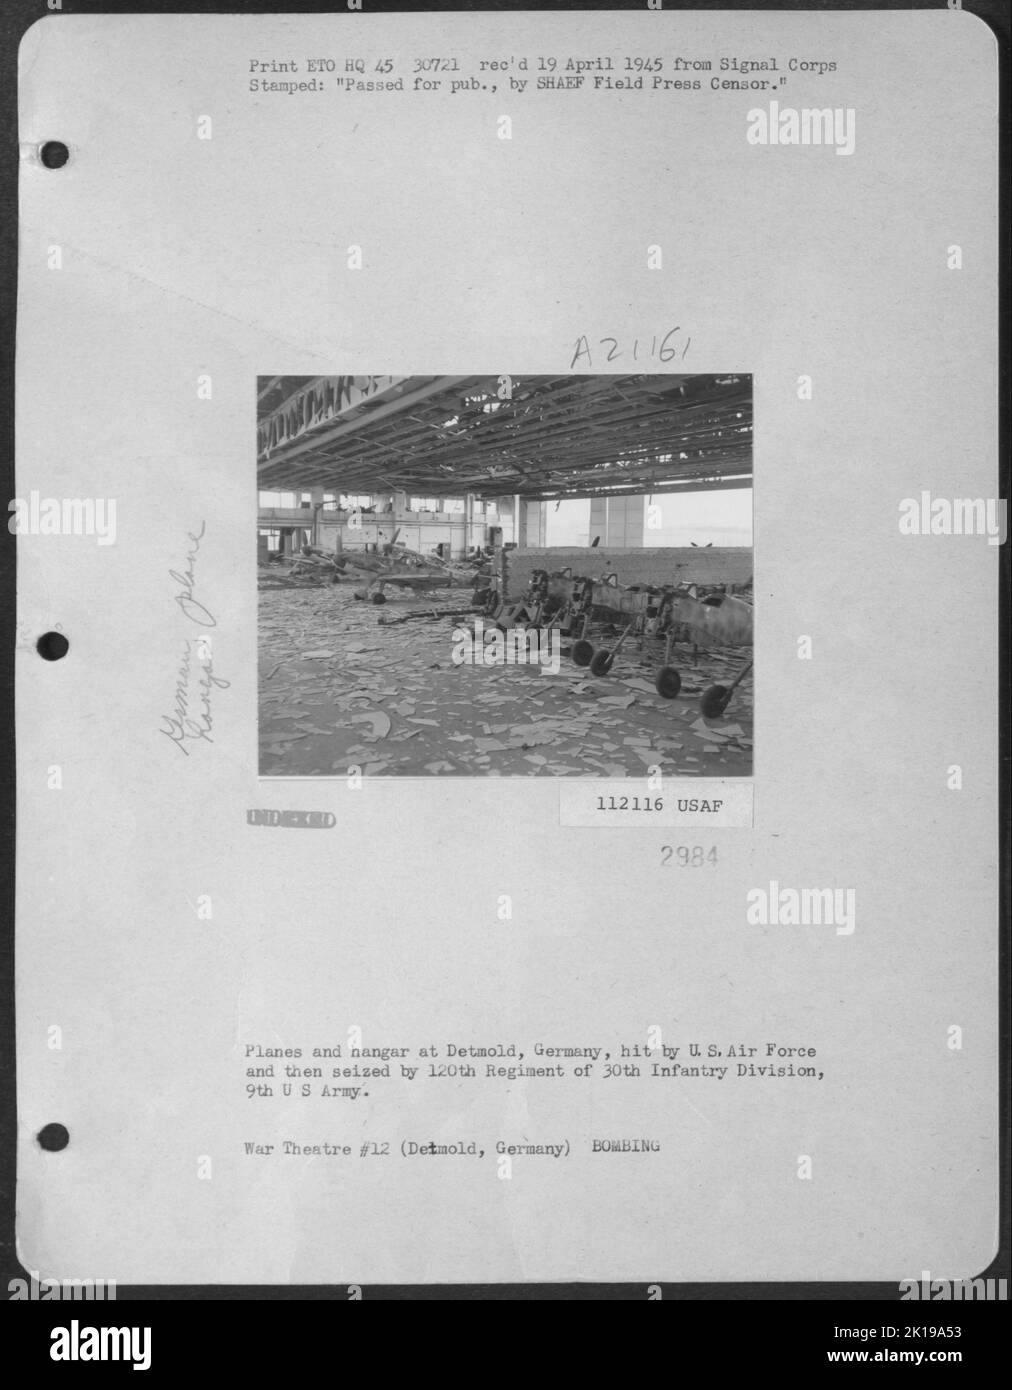 Planes And Hangar At Detmold, Germany, Hit By Us Air Force And Then Seized By 120Th Regiment Of 30Th Infantry Division, 9Th Us Army. Stock Photo